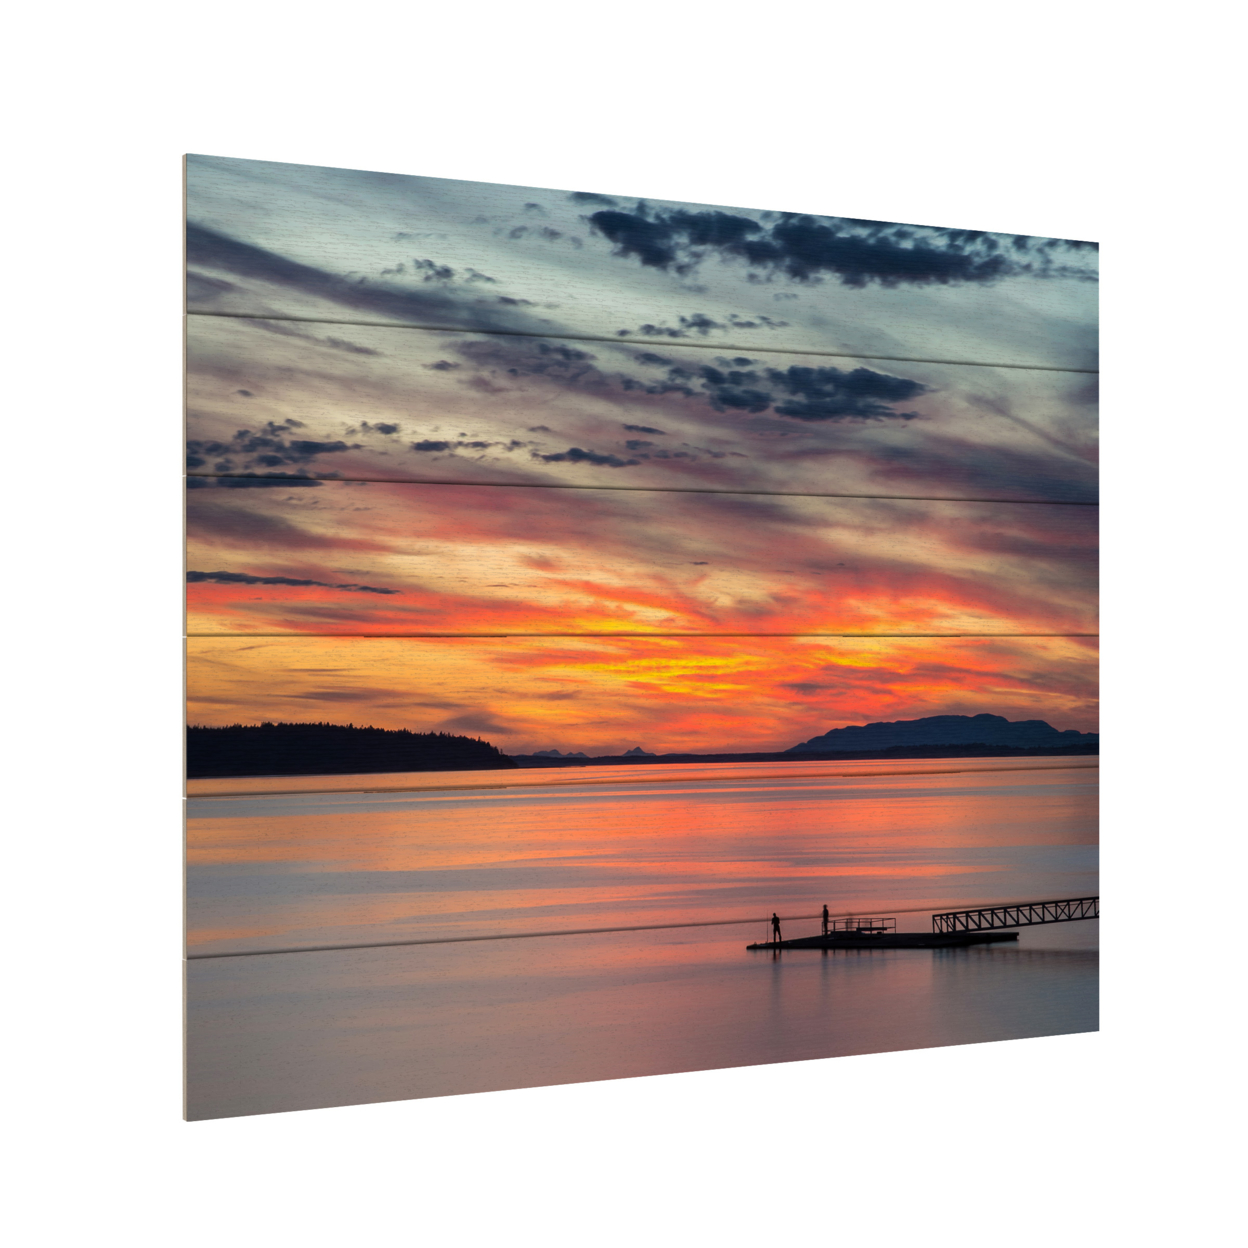 Wooden Slat Art 18 X 22 Inches Titled Sunset Pier Ready To Hang Home Decor Picture